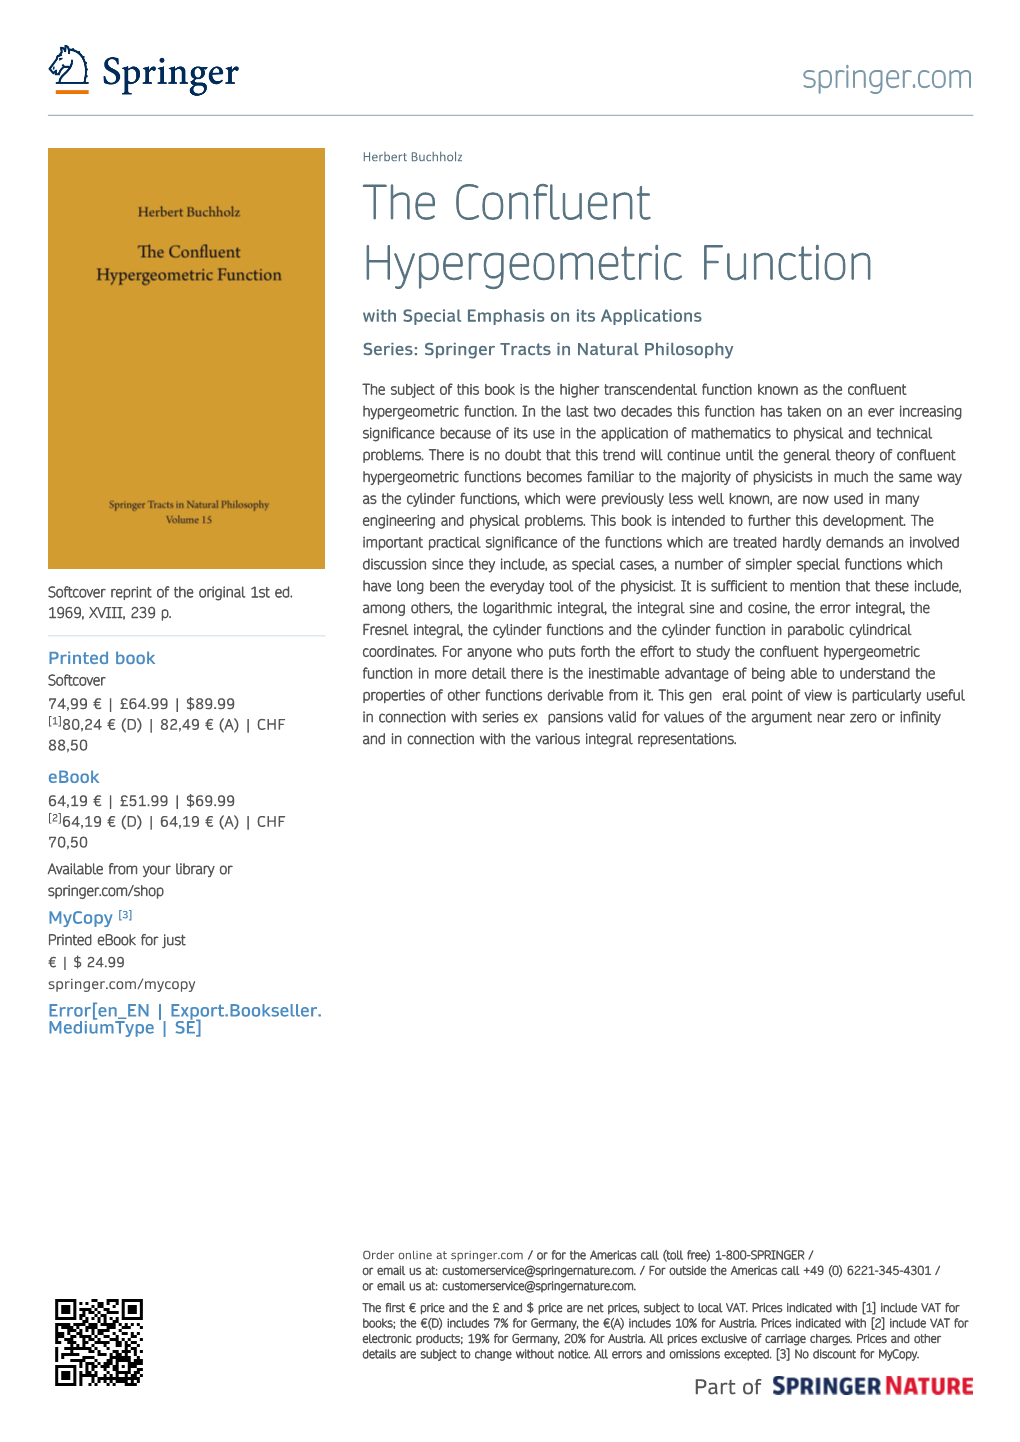 The Confluent Hypergeometric Function with Special Emphasis on Its Applications Series: Springer Tracts in Natural Philosophy